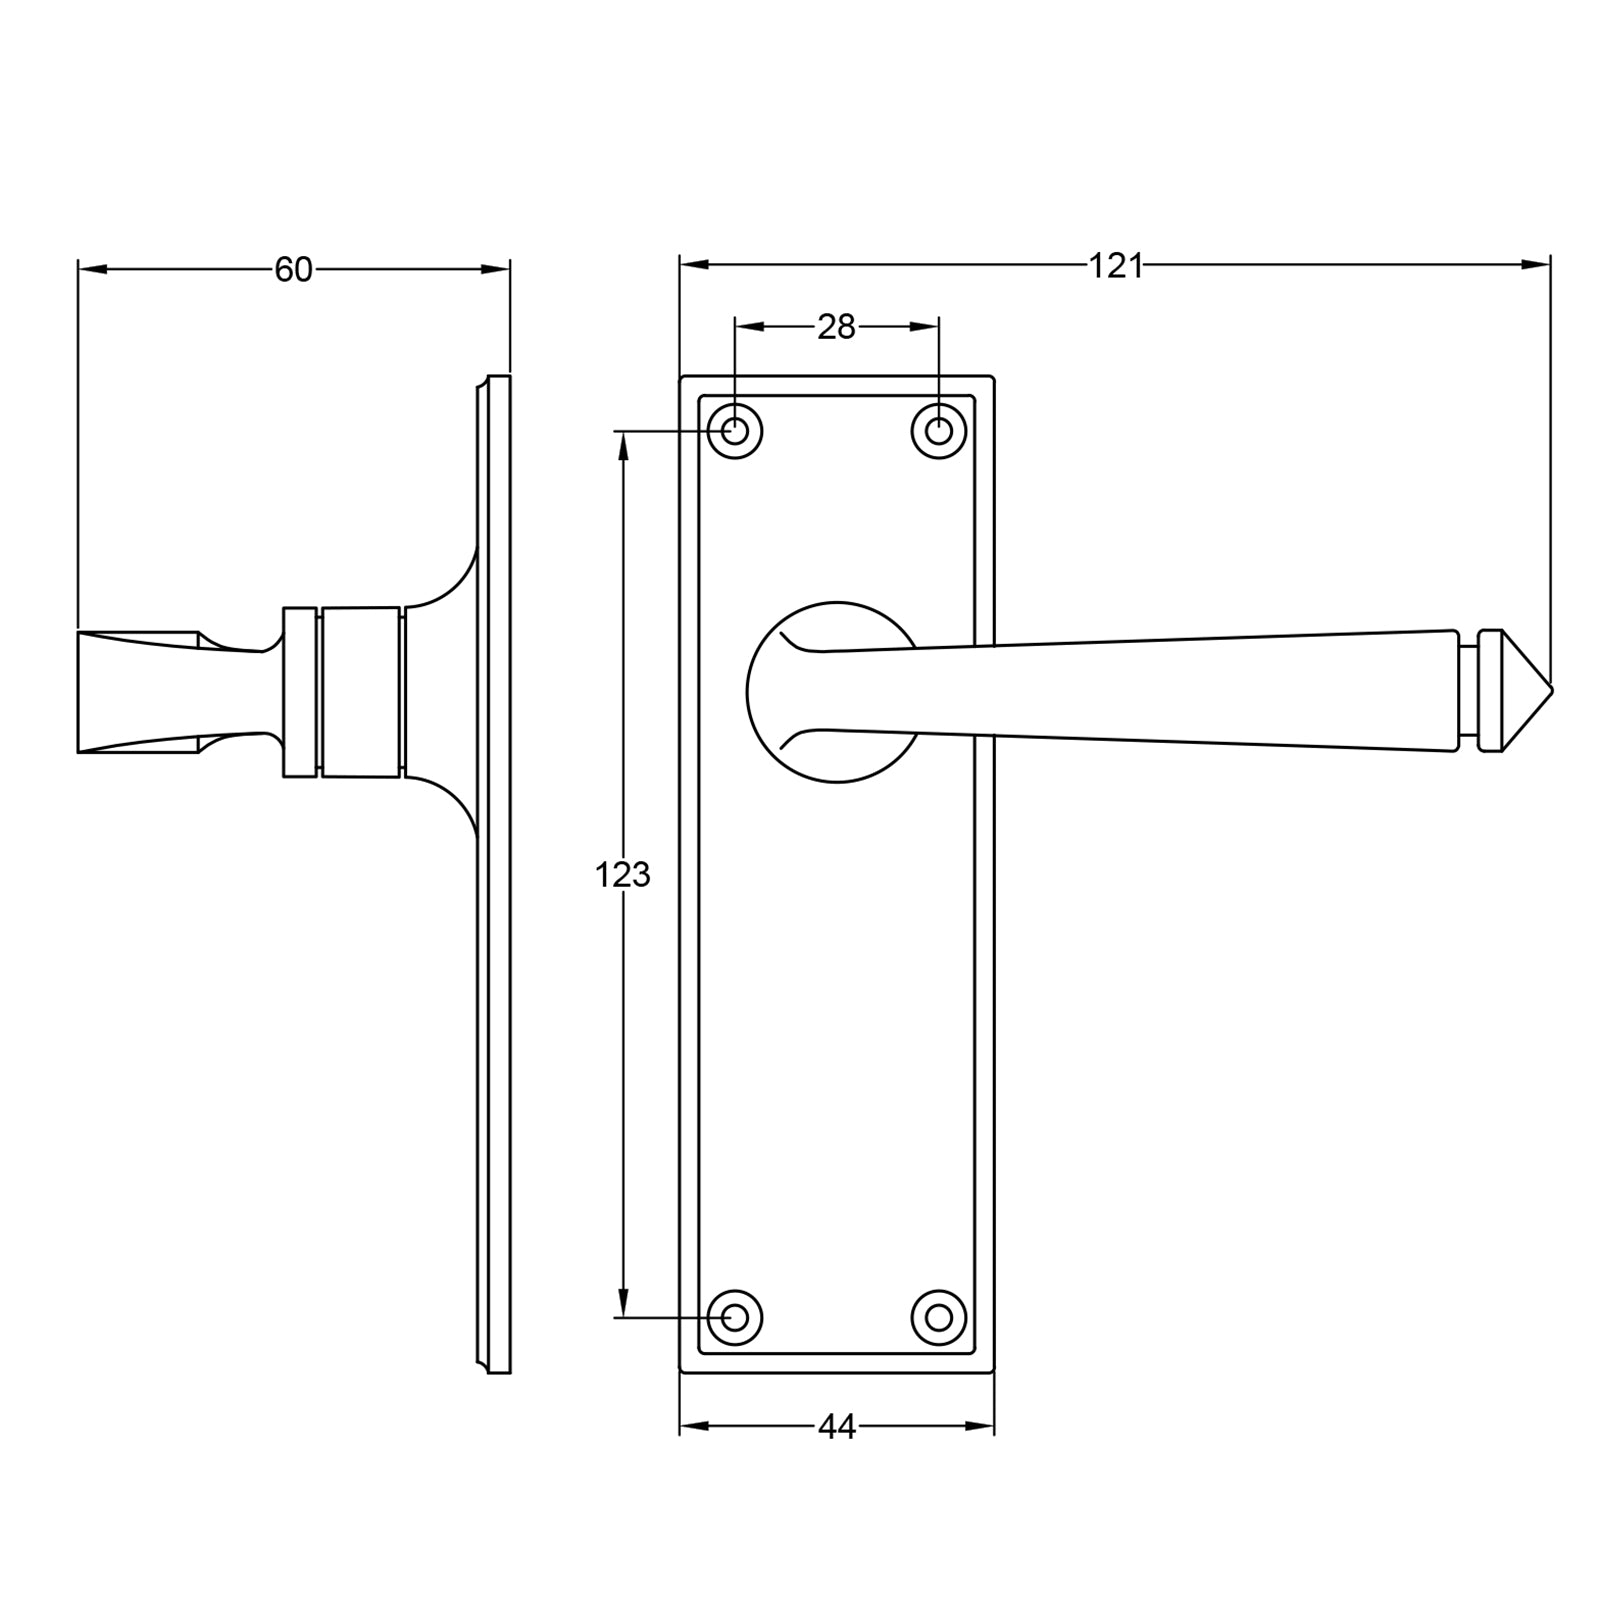 Avon lever handle dimension drawing SHOW